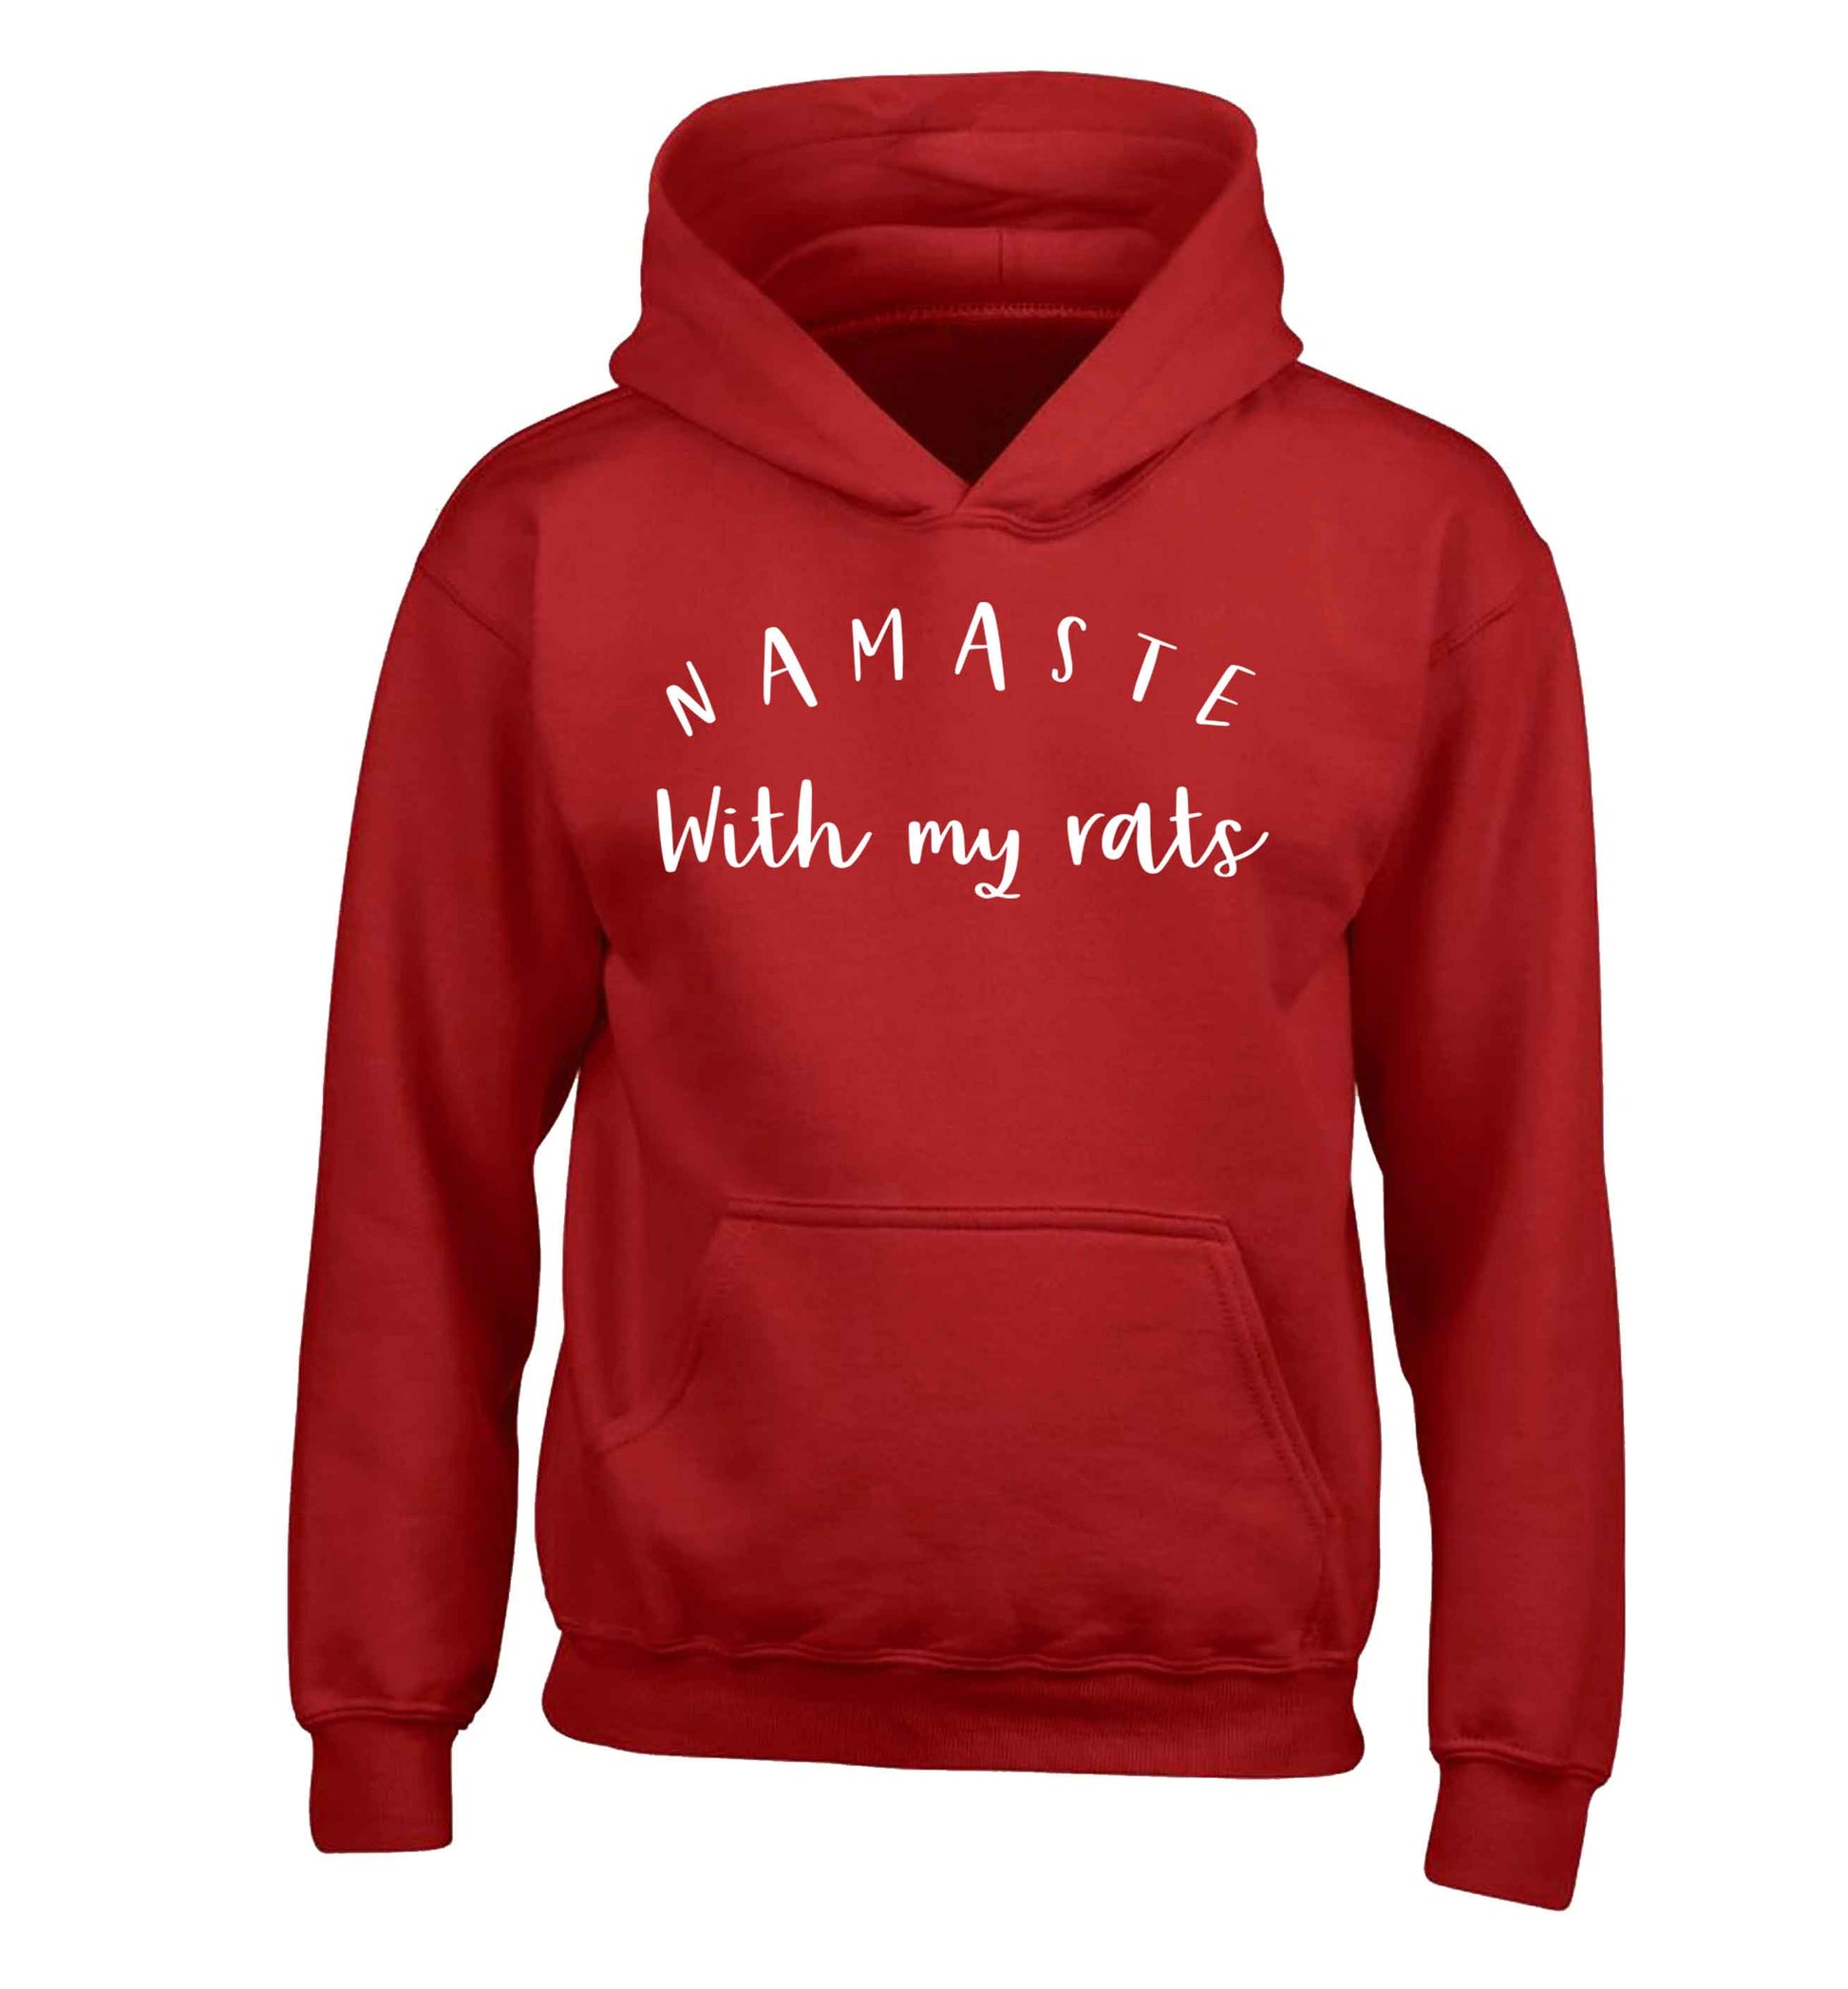 Namaste with my rats children's red hoodie 12-13 Years